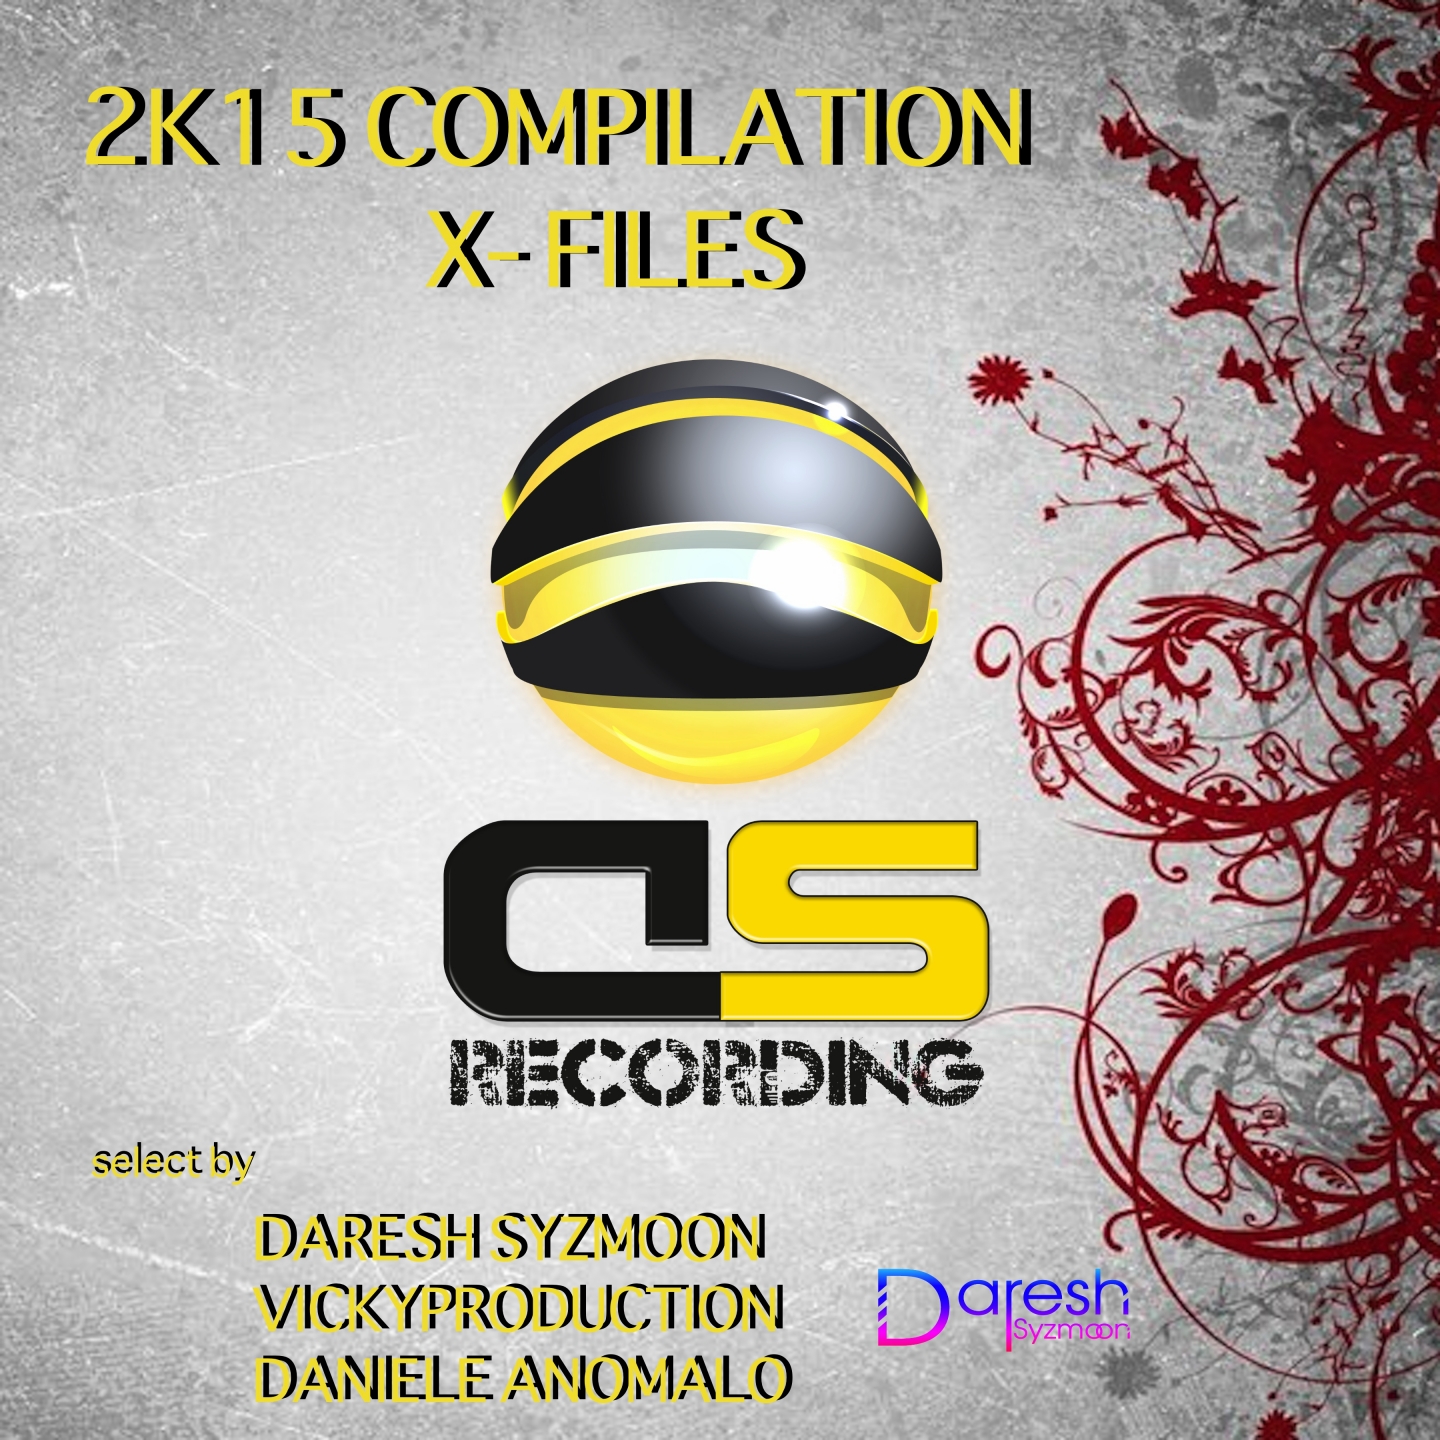 2K15 Compilation X-Files (Select by Dresh Syzmoon, Vickyproduction, Daniele Anomalo)